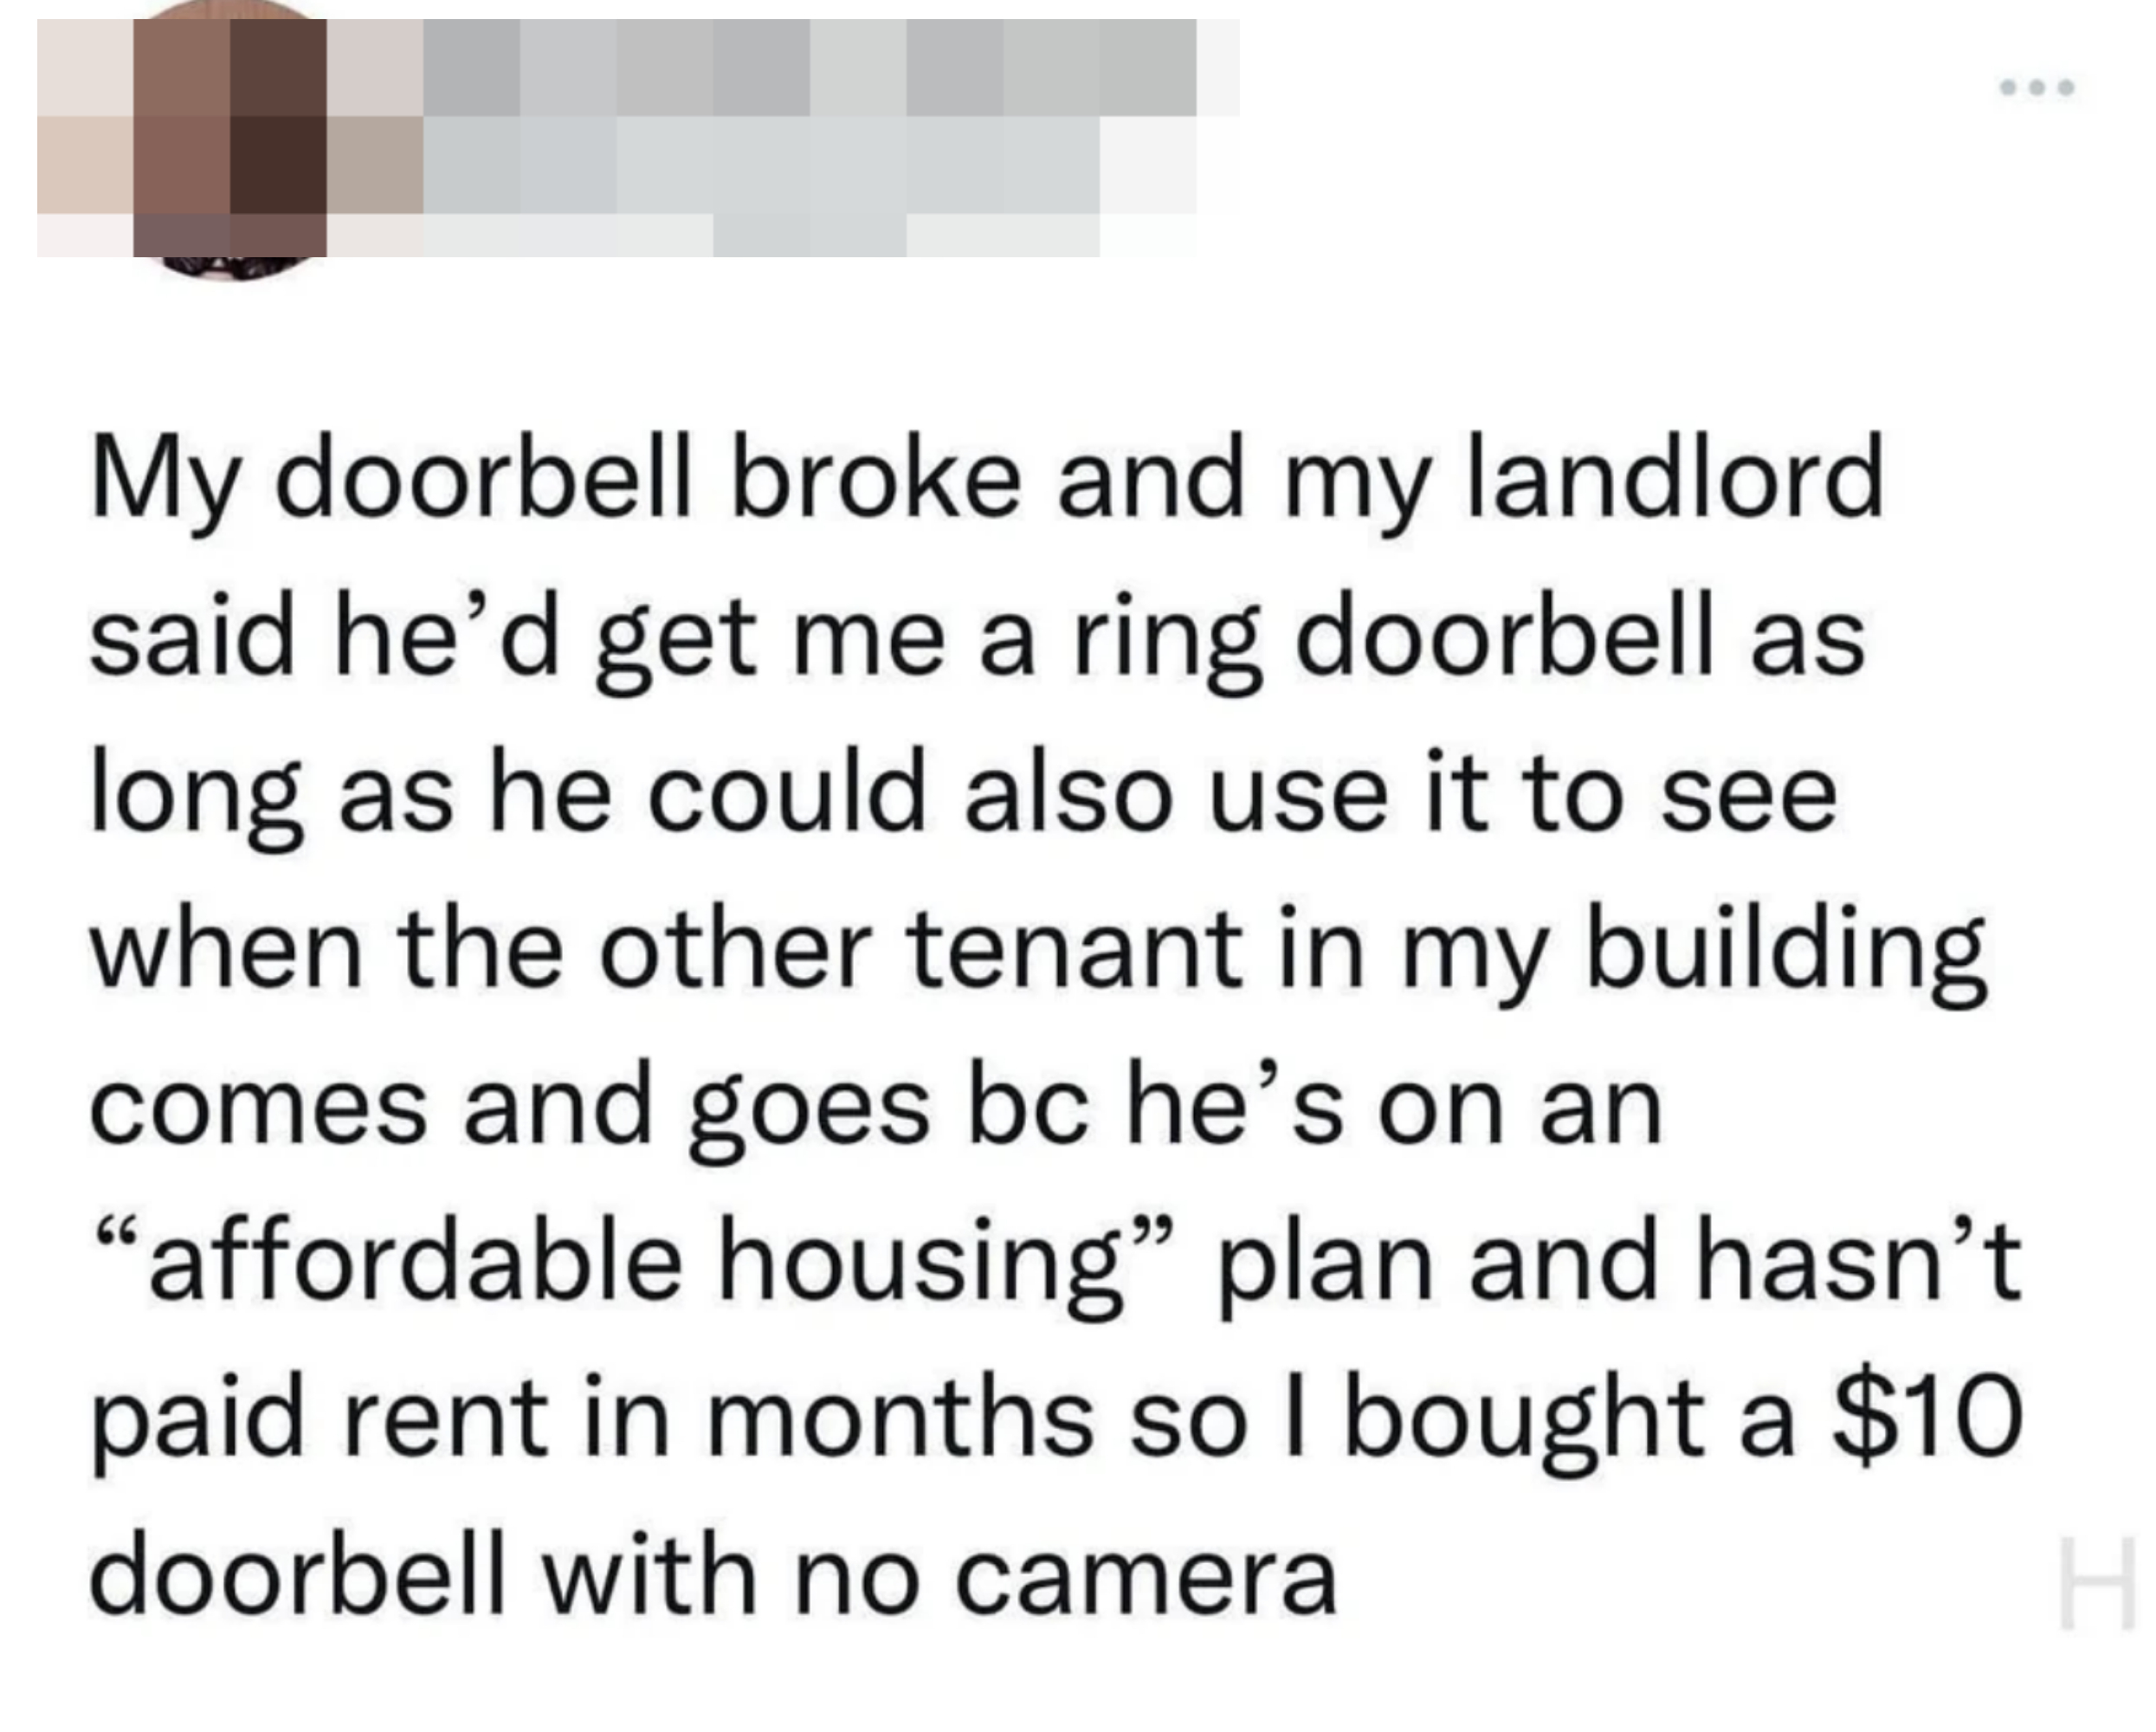 landlord wanted tenant to get a doorbell camera and use it to spy on the tenant in the building that was on affordable housing